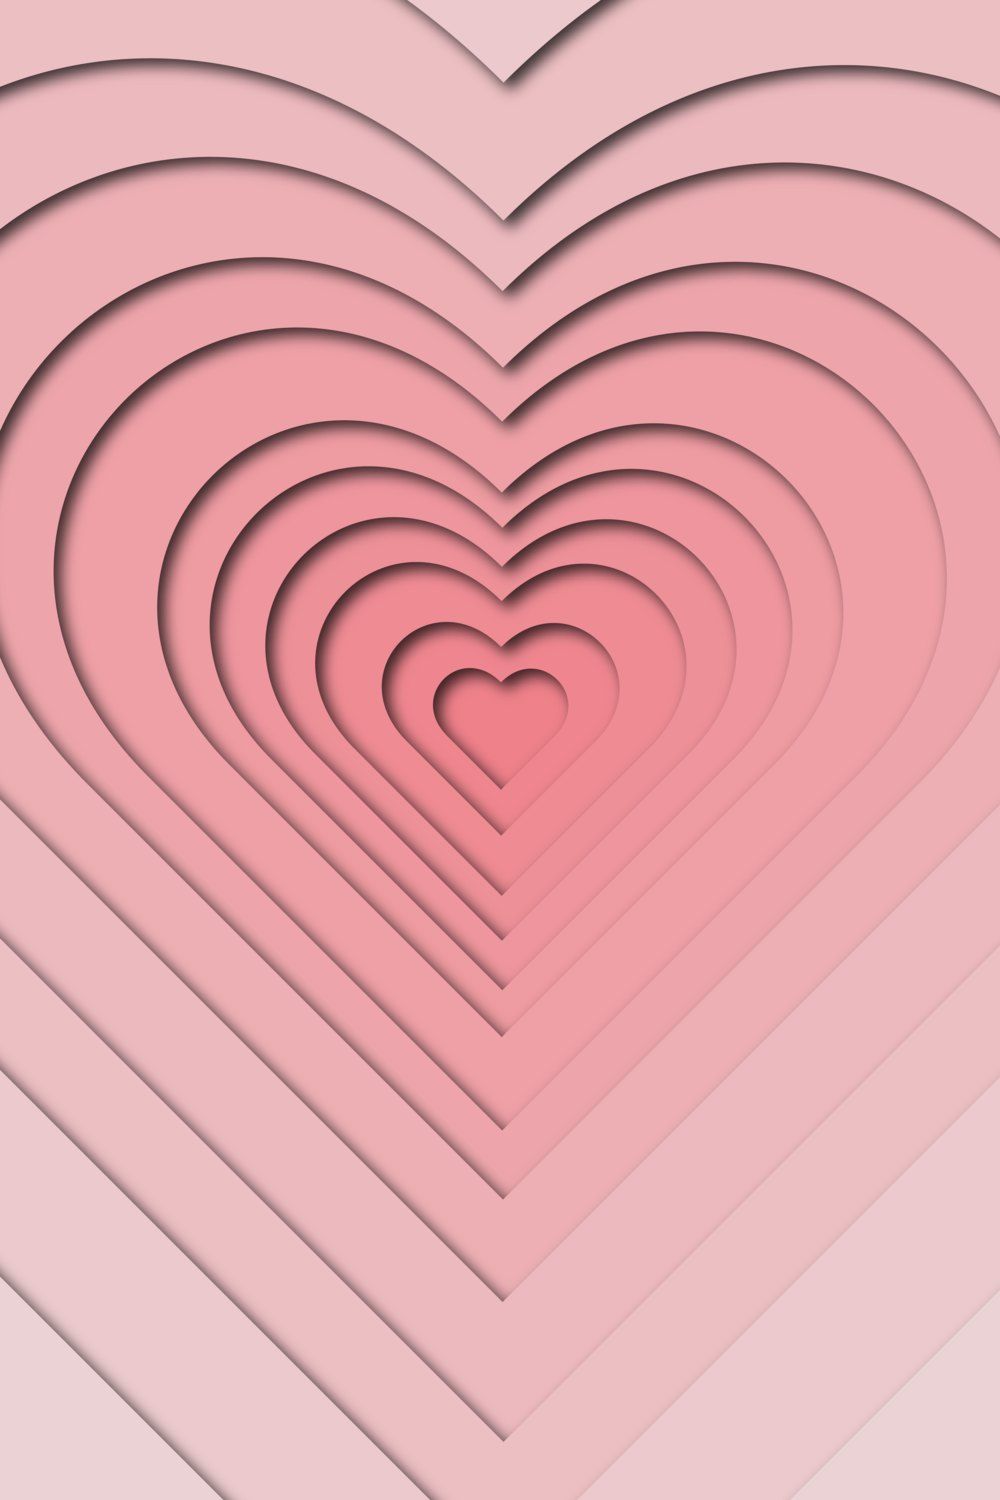 A pink heart background - Lovecore